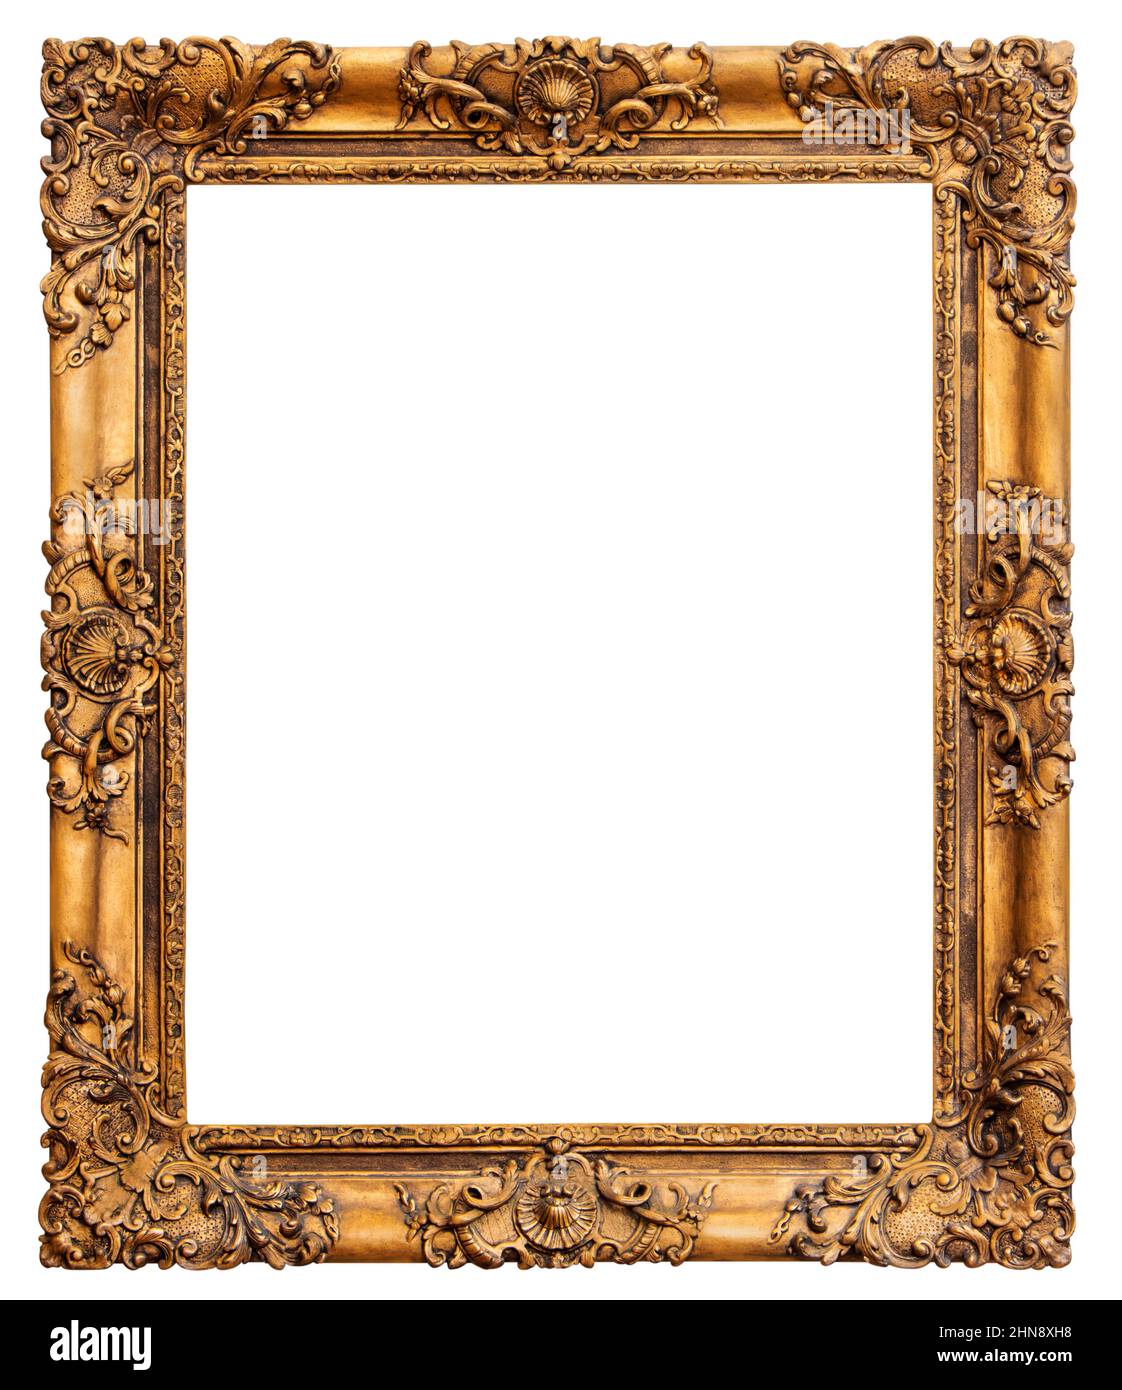 Wooden vintage rectangular gilded antique empty picture frame, isolated on white background Stock Photo